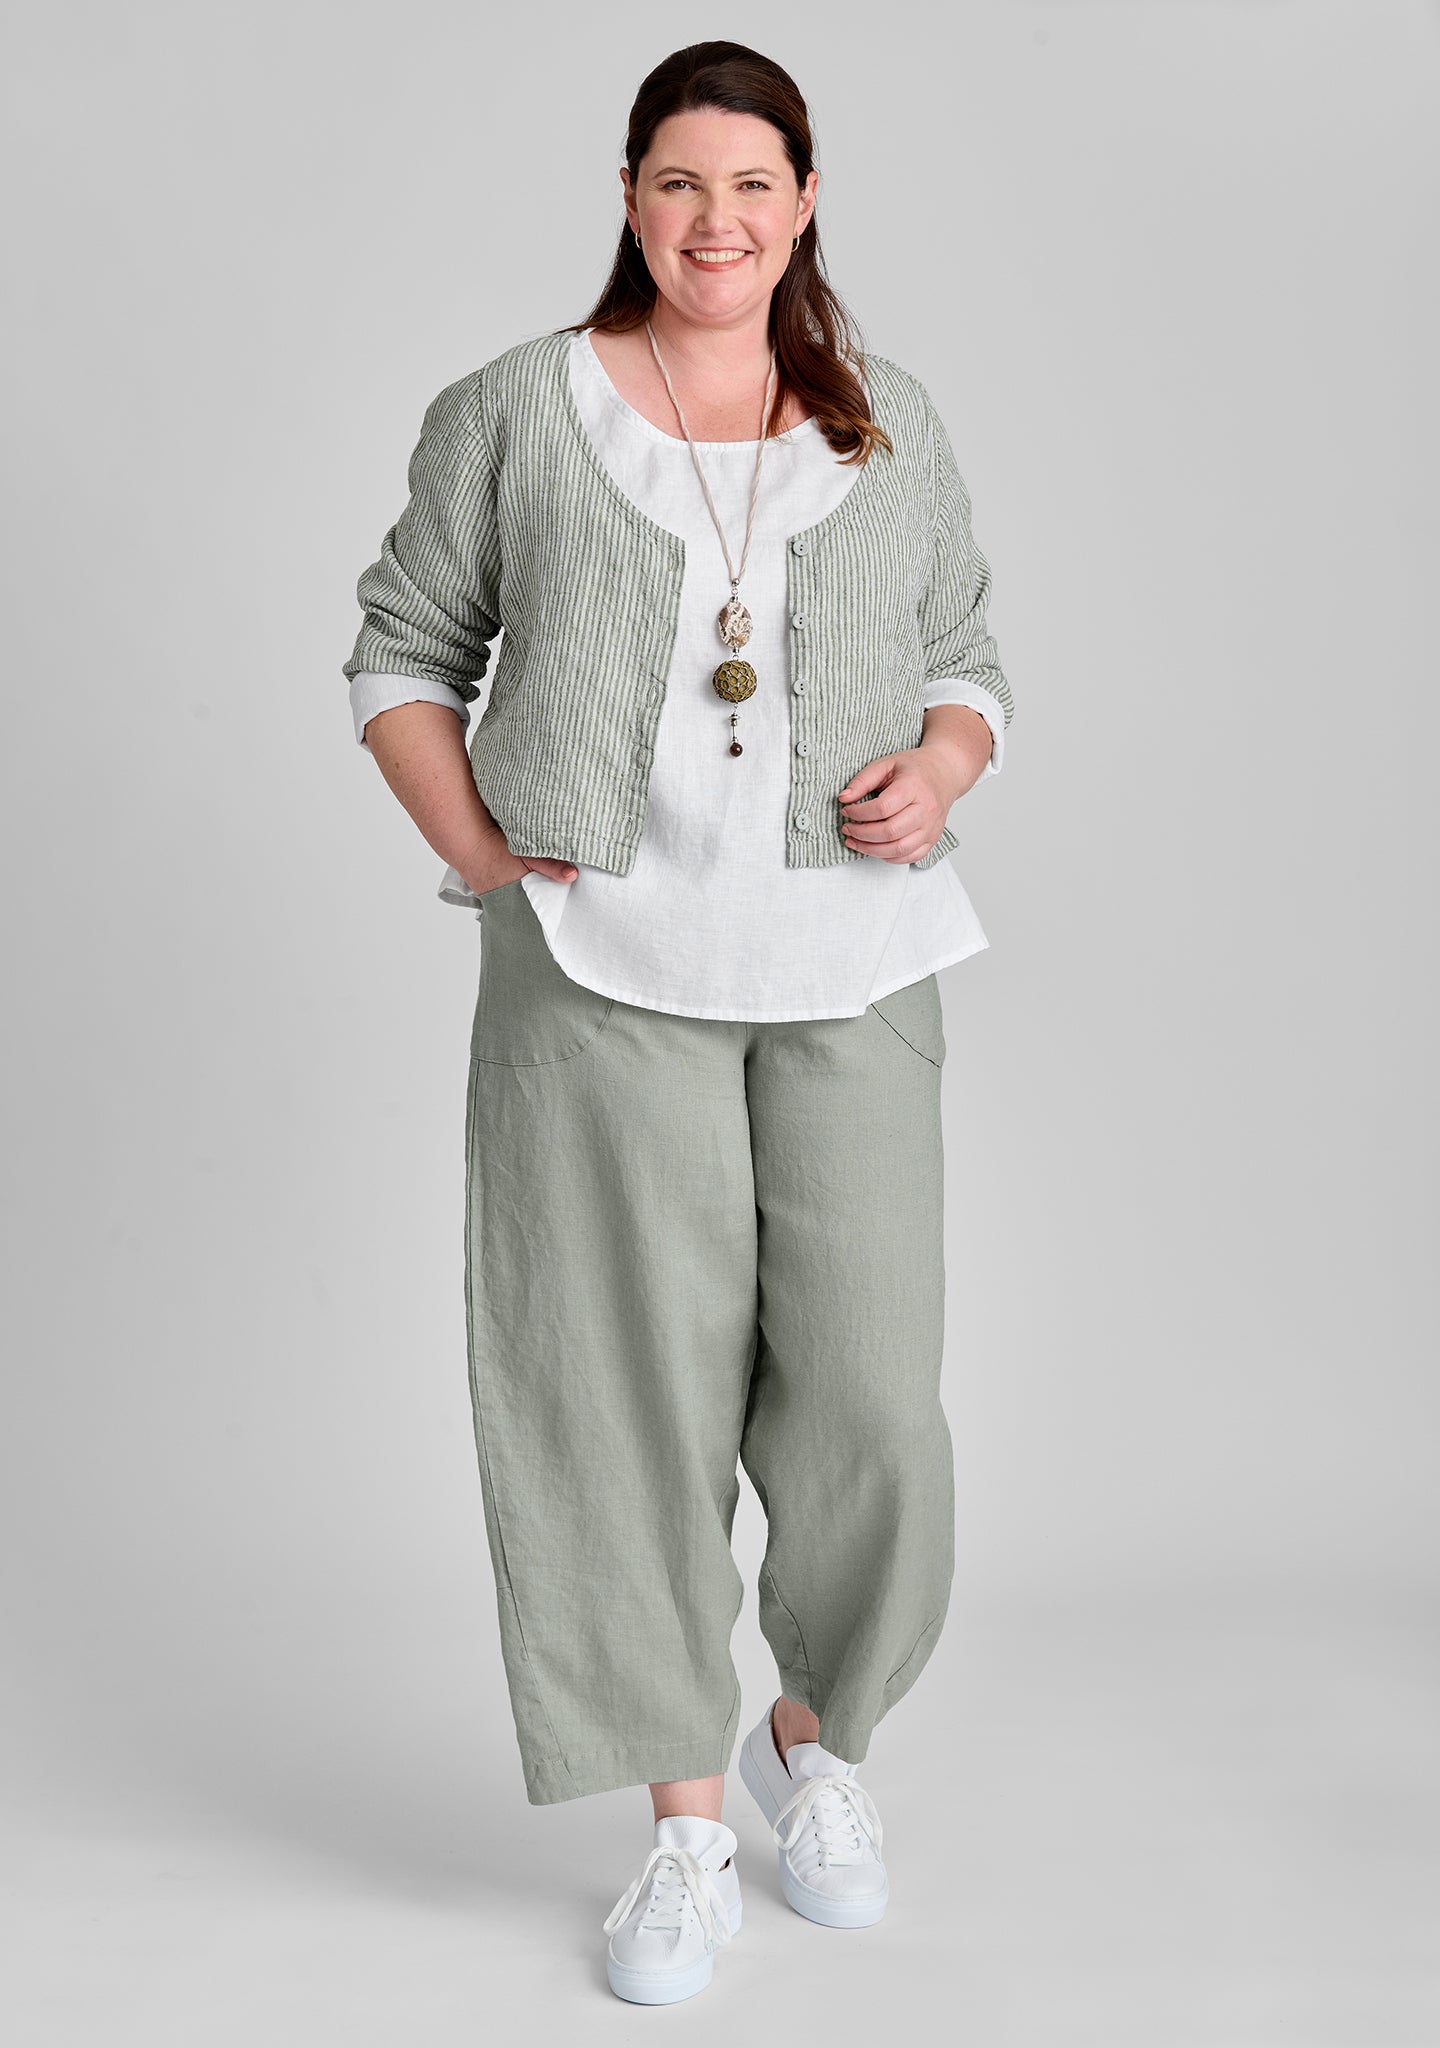 FLAX linen blouse in green with linen shirt in white with linen pants in green